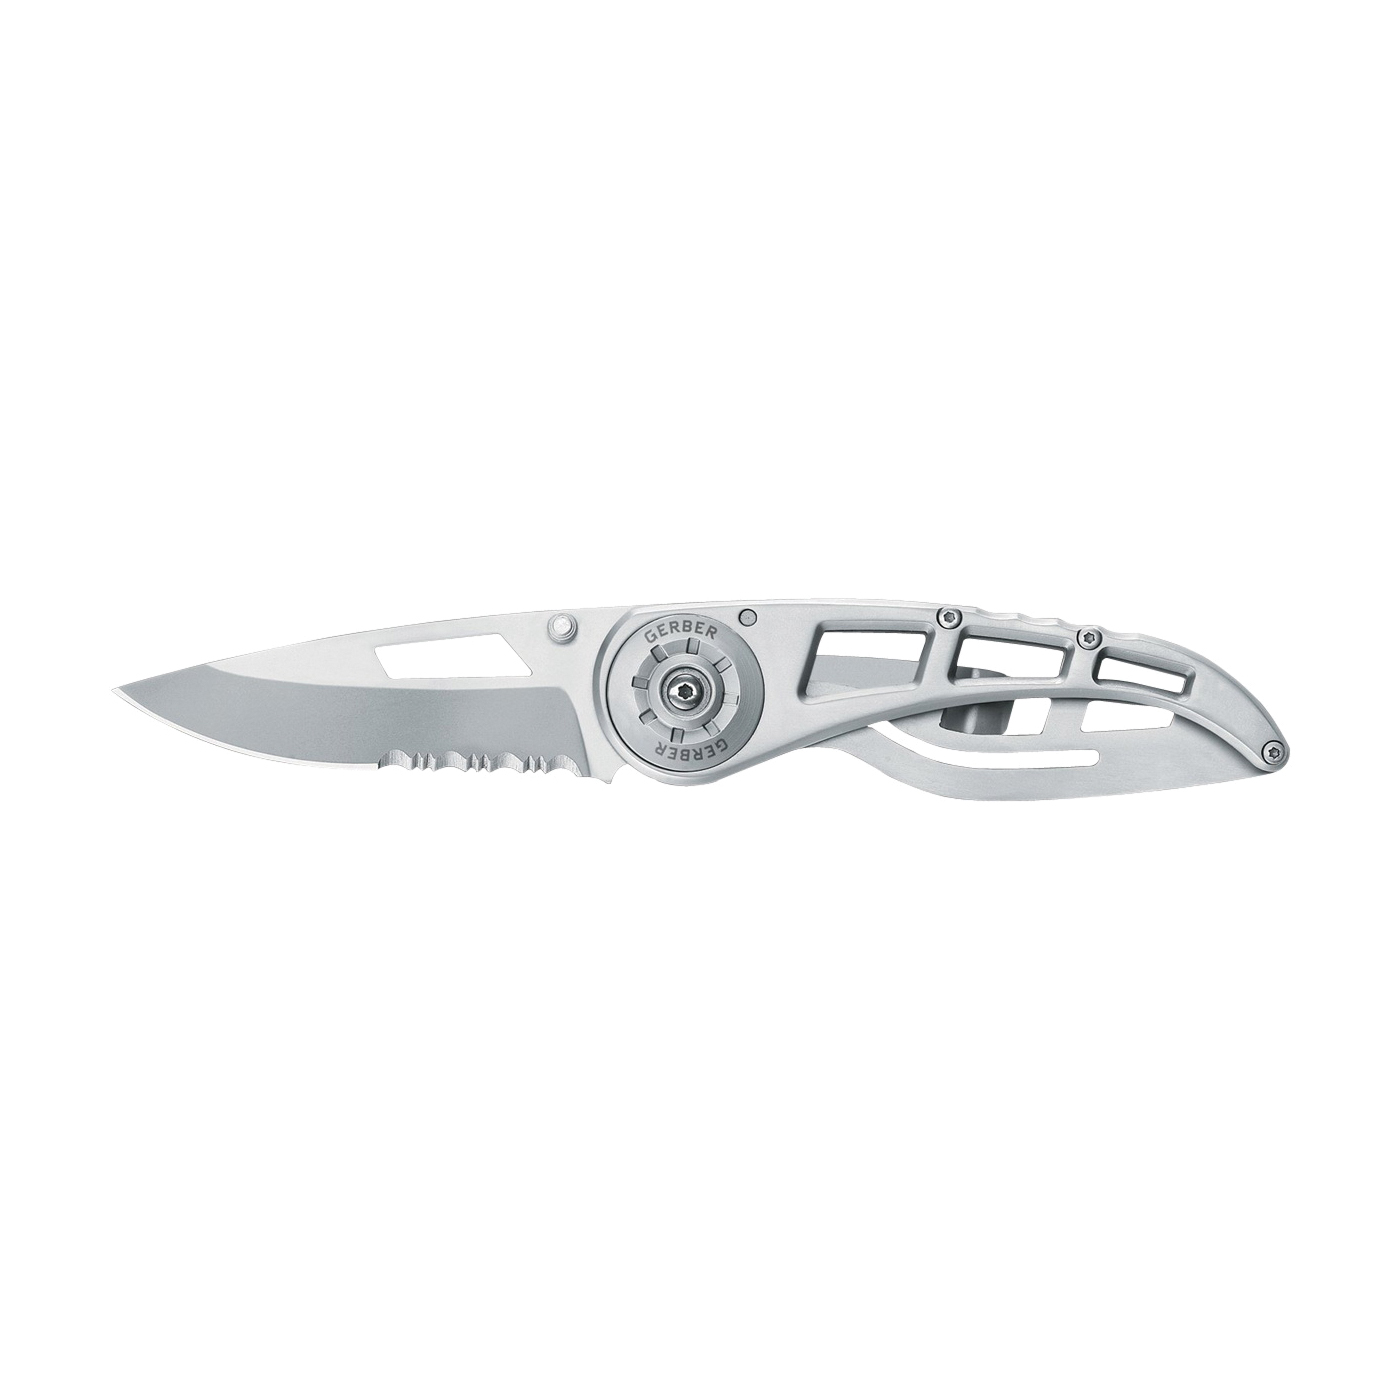 22-41613 Folding Knife, 2.3 in L Blade, 5Cr15MoV Stainless Steel Blade